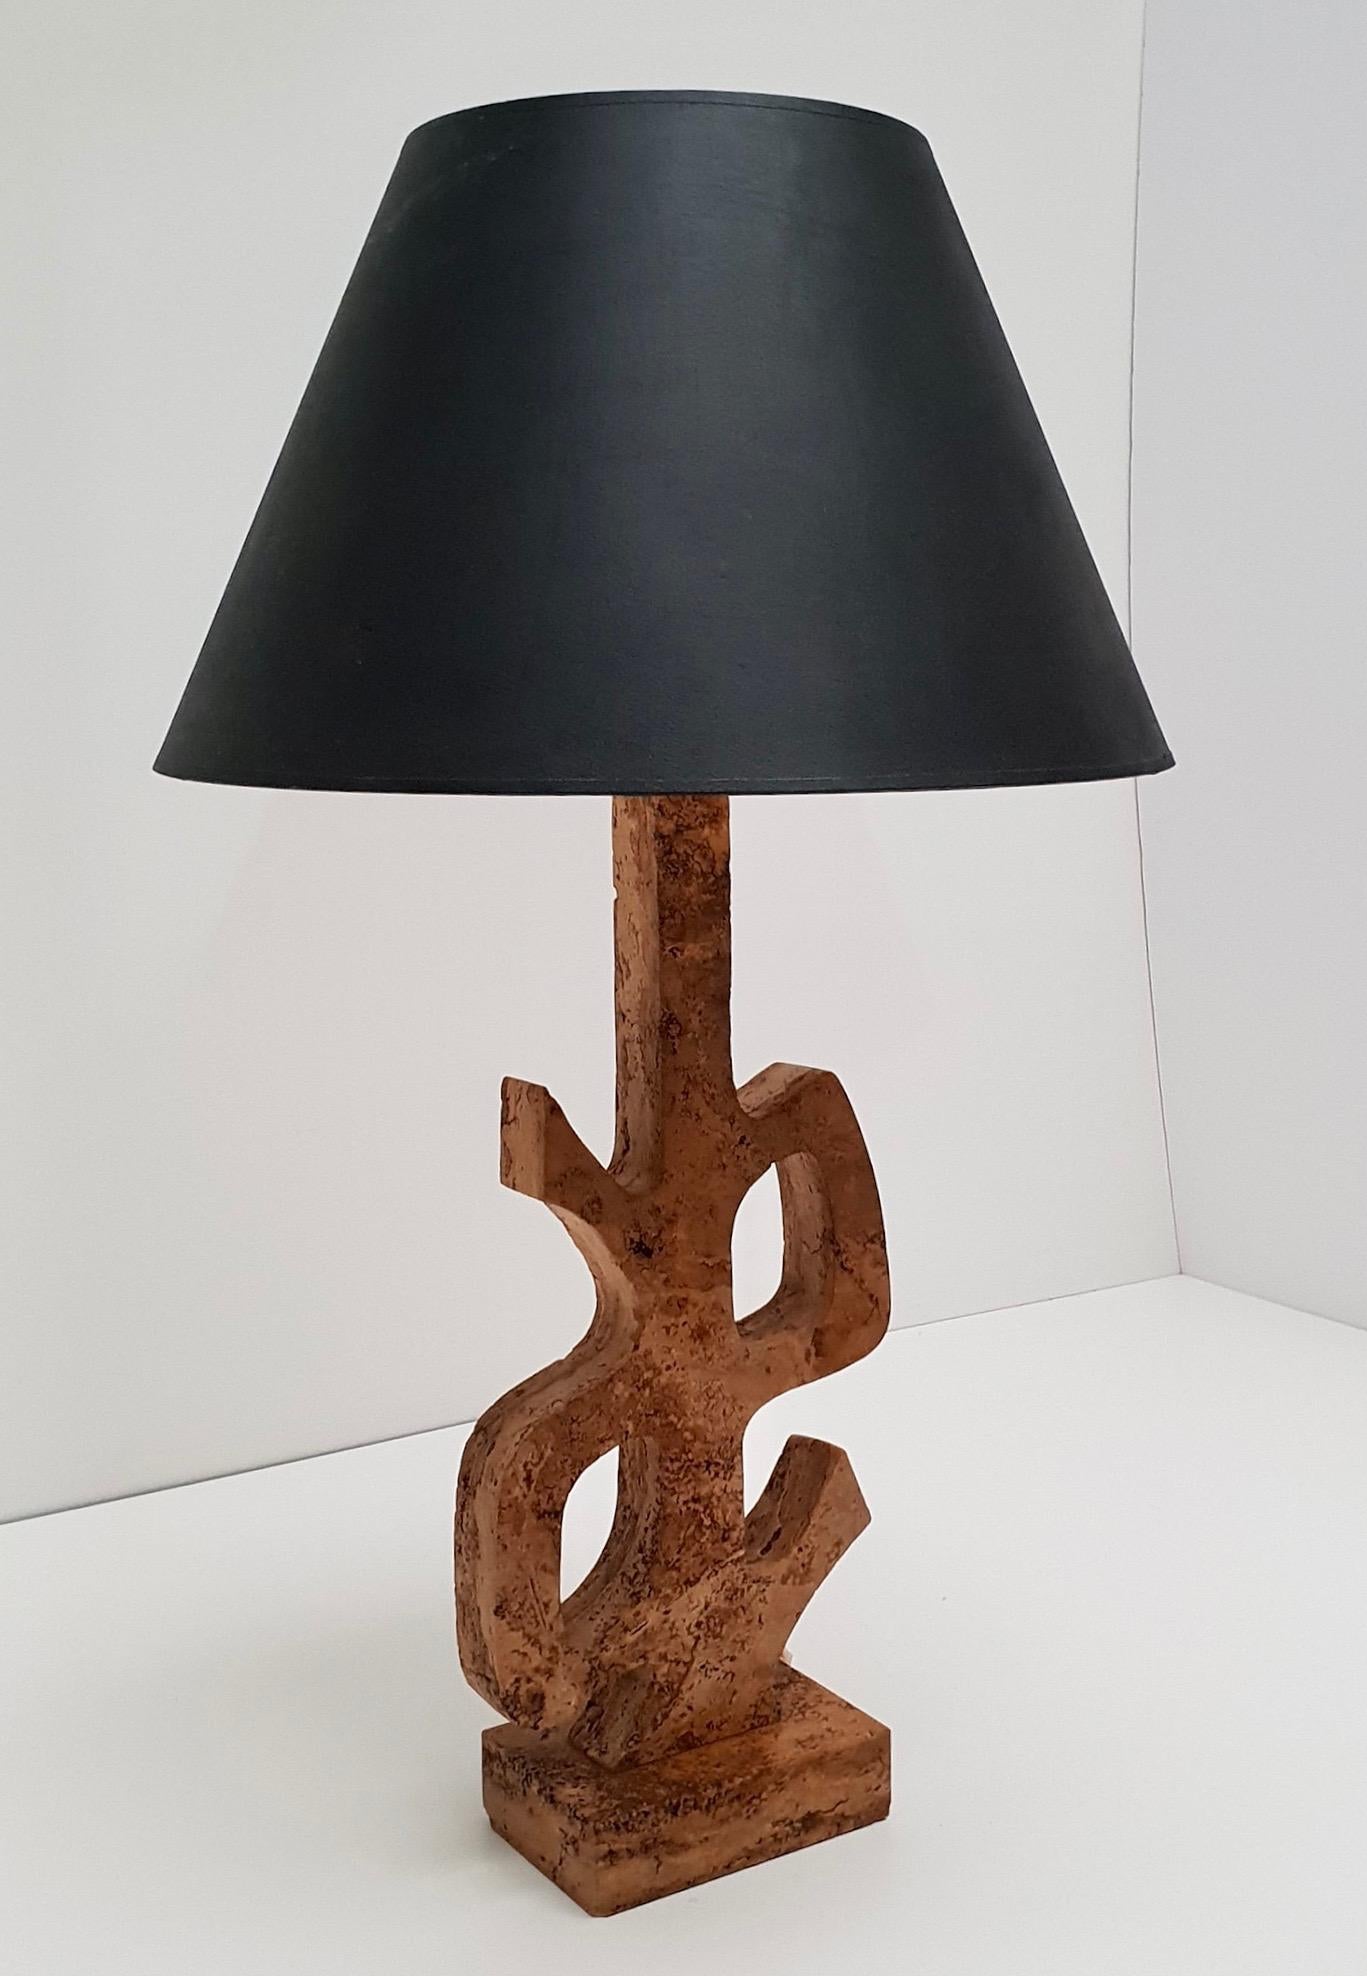 Rara Italian marble sculptural midcentury table lamp.

Dimensions base:
Width 24 cm, depth 12 cm, height 62 cm, without socket 55 cm. Weight 8 kg.
Height with shade 85 cm, diameter shade 50 cm.
The lamp shade is not included in the price.